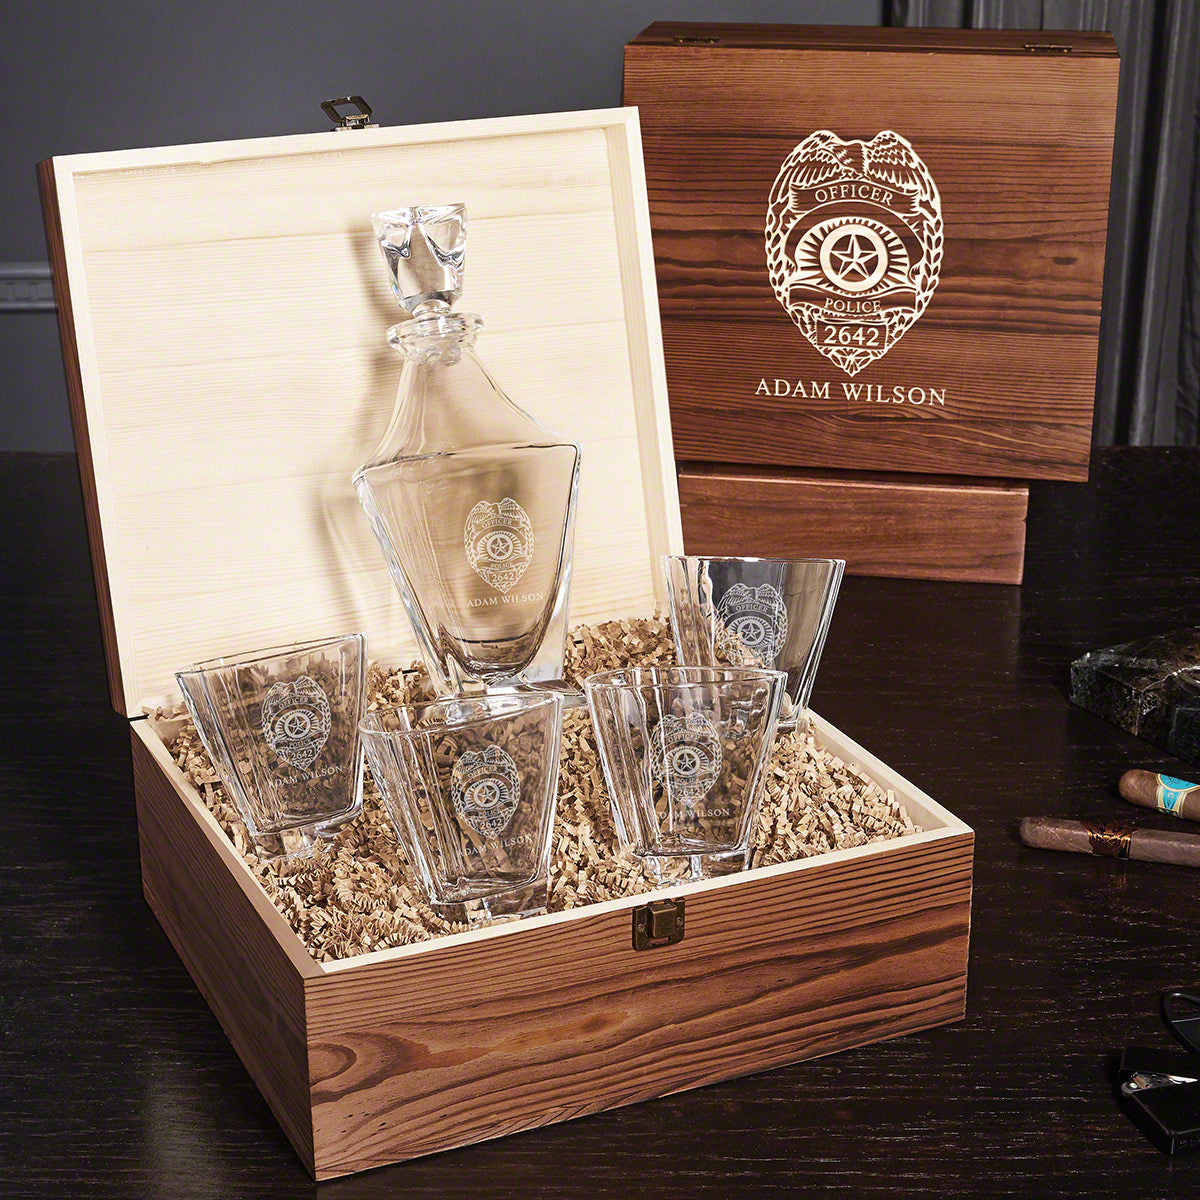 Custom Whiskey Boxed Set of Police Officer Gifts